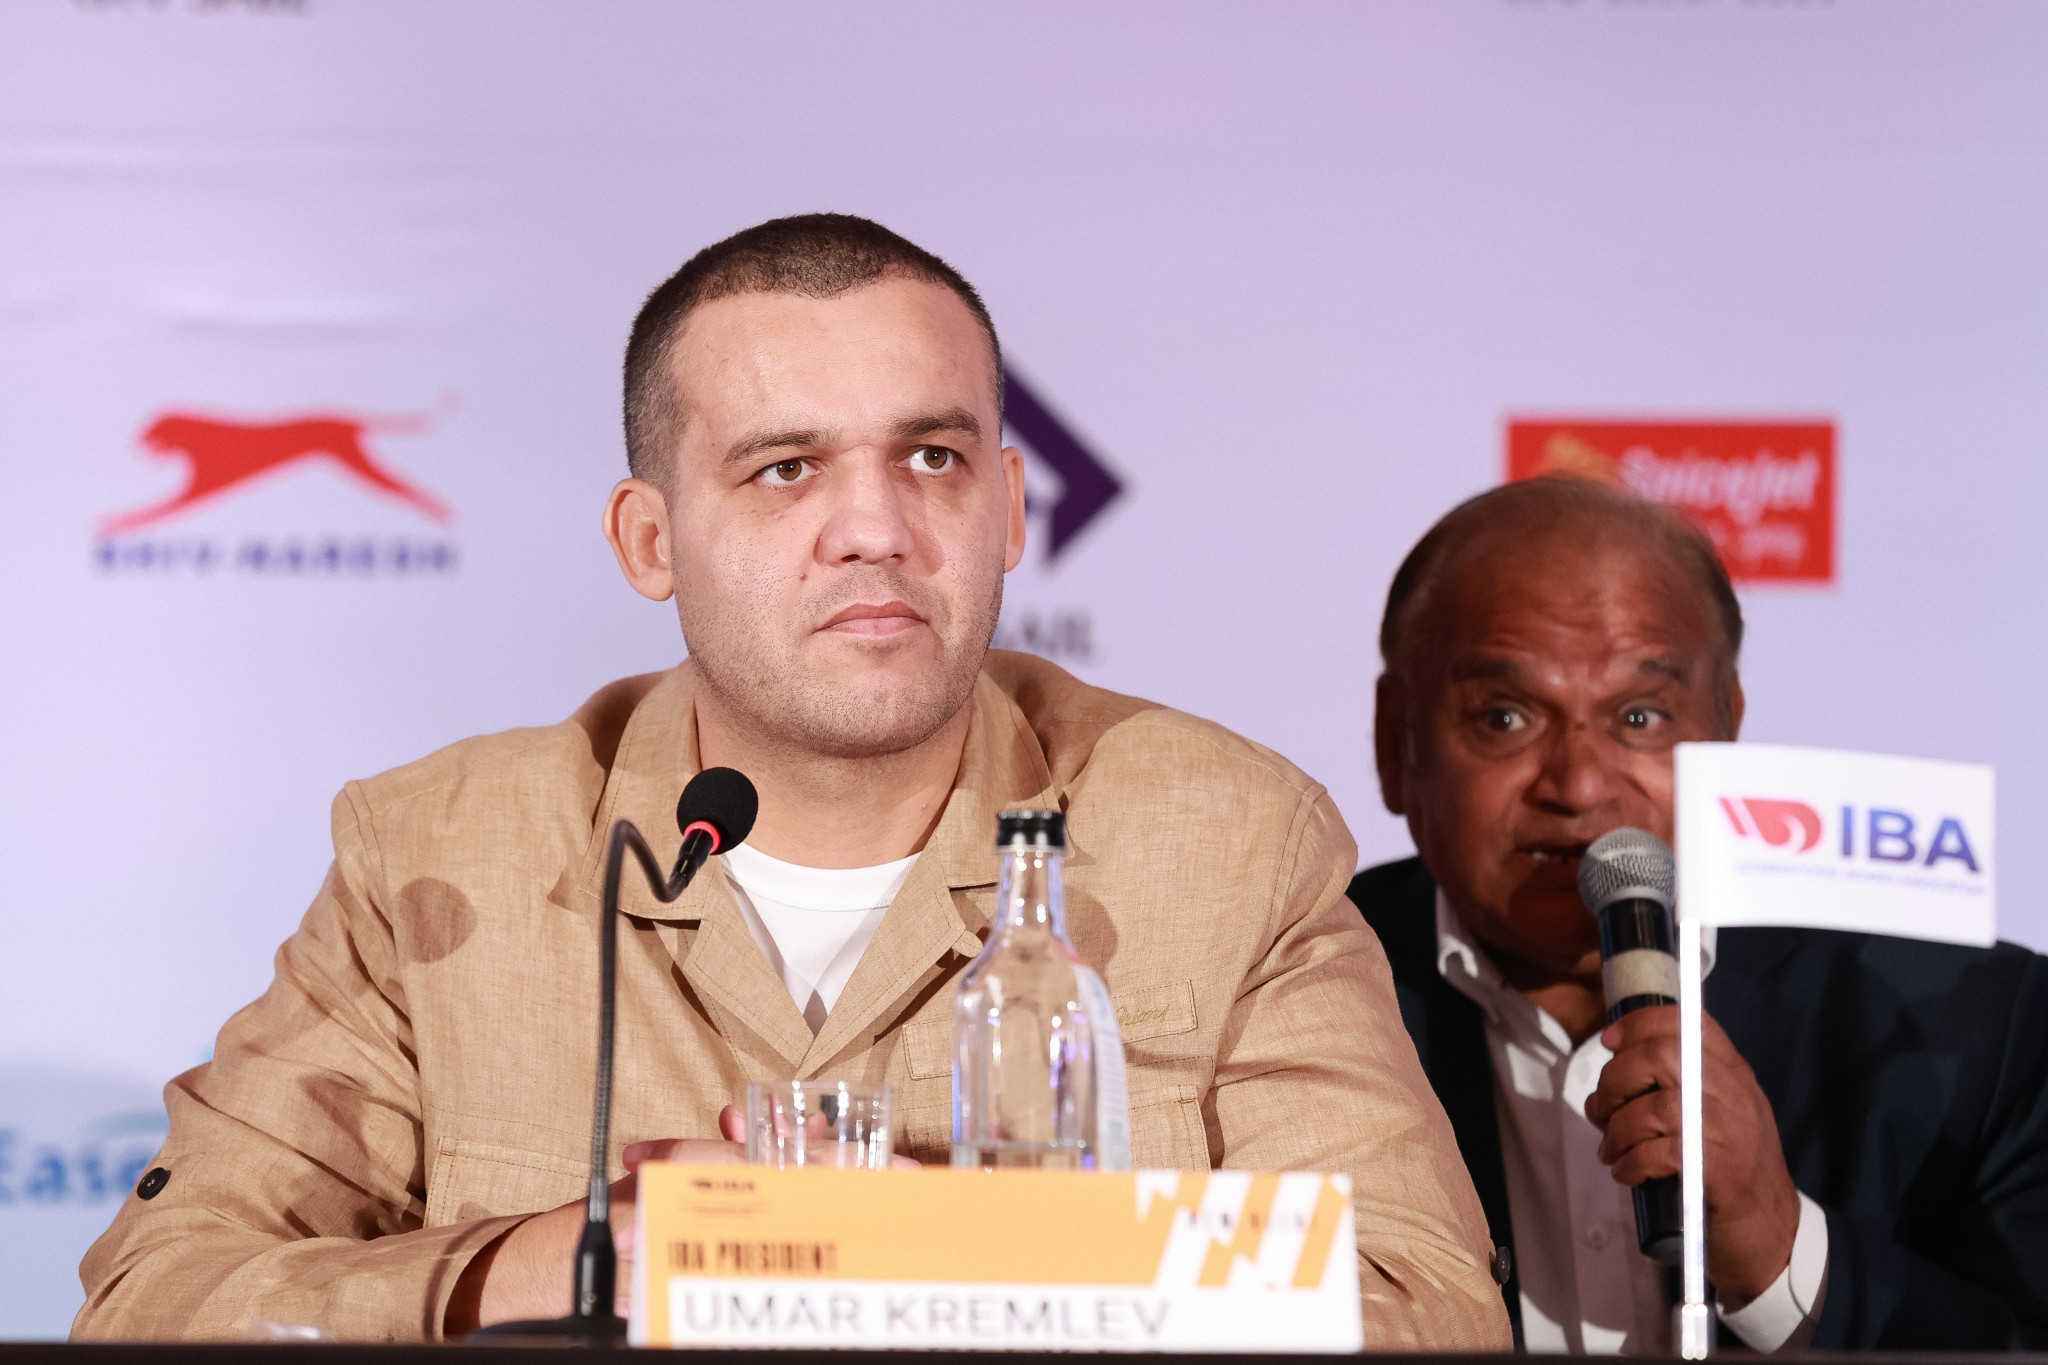 IBA President Umar Kremlev believes the integrity of the Women's World Championships will be in 